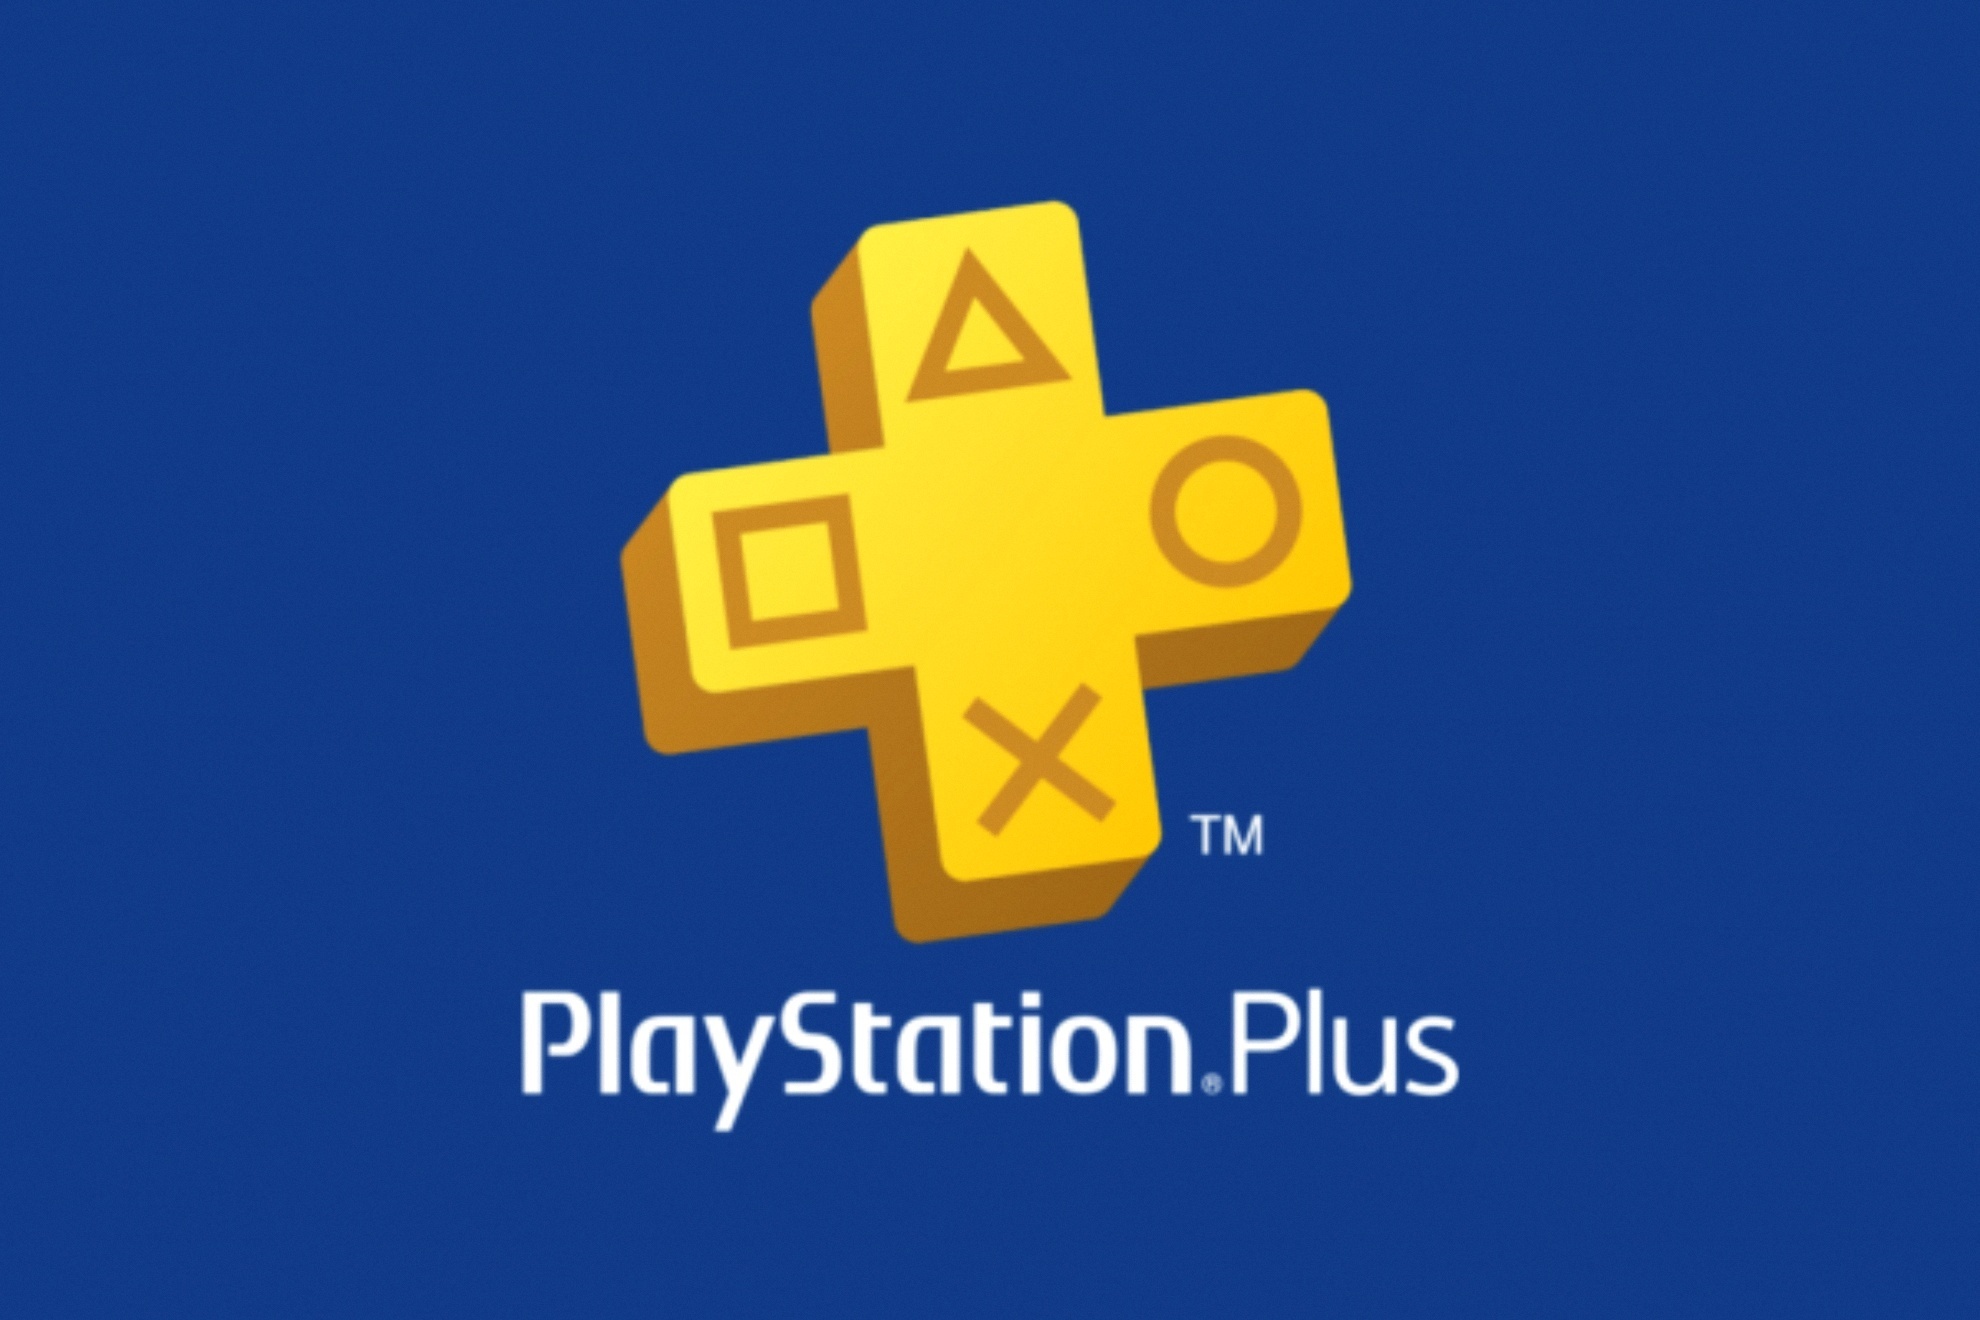 PlayStation Plus is getting more expensive.